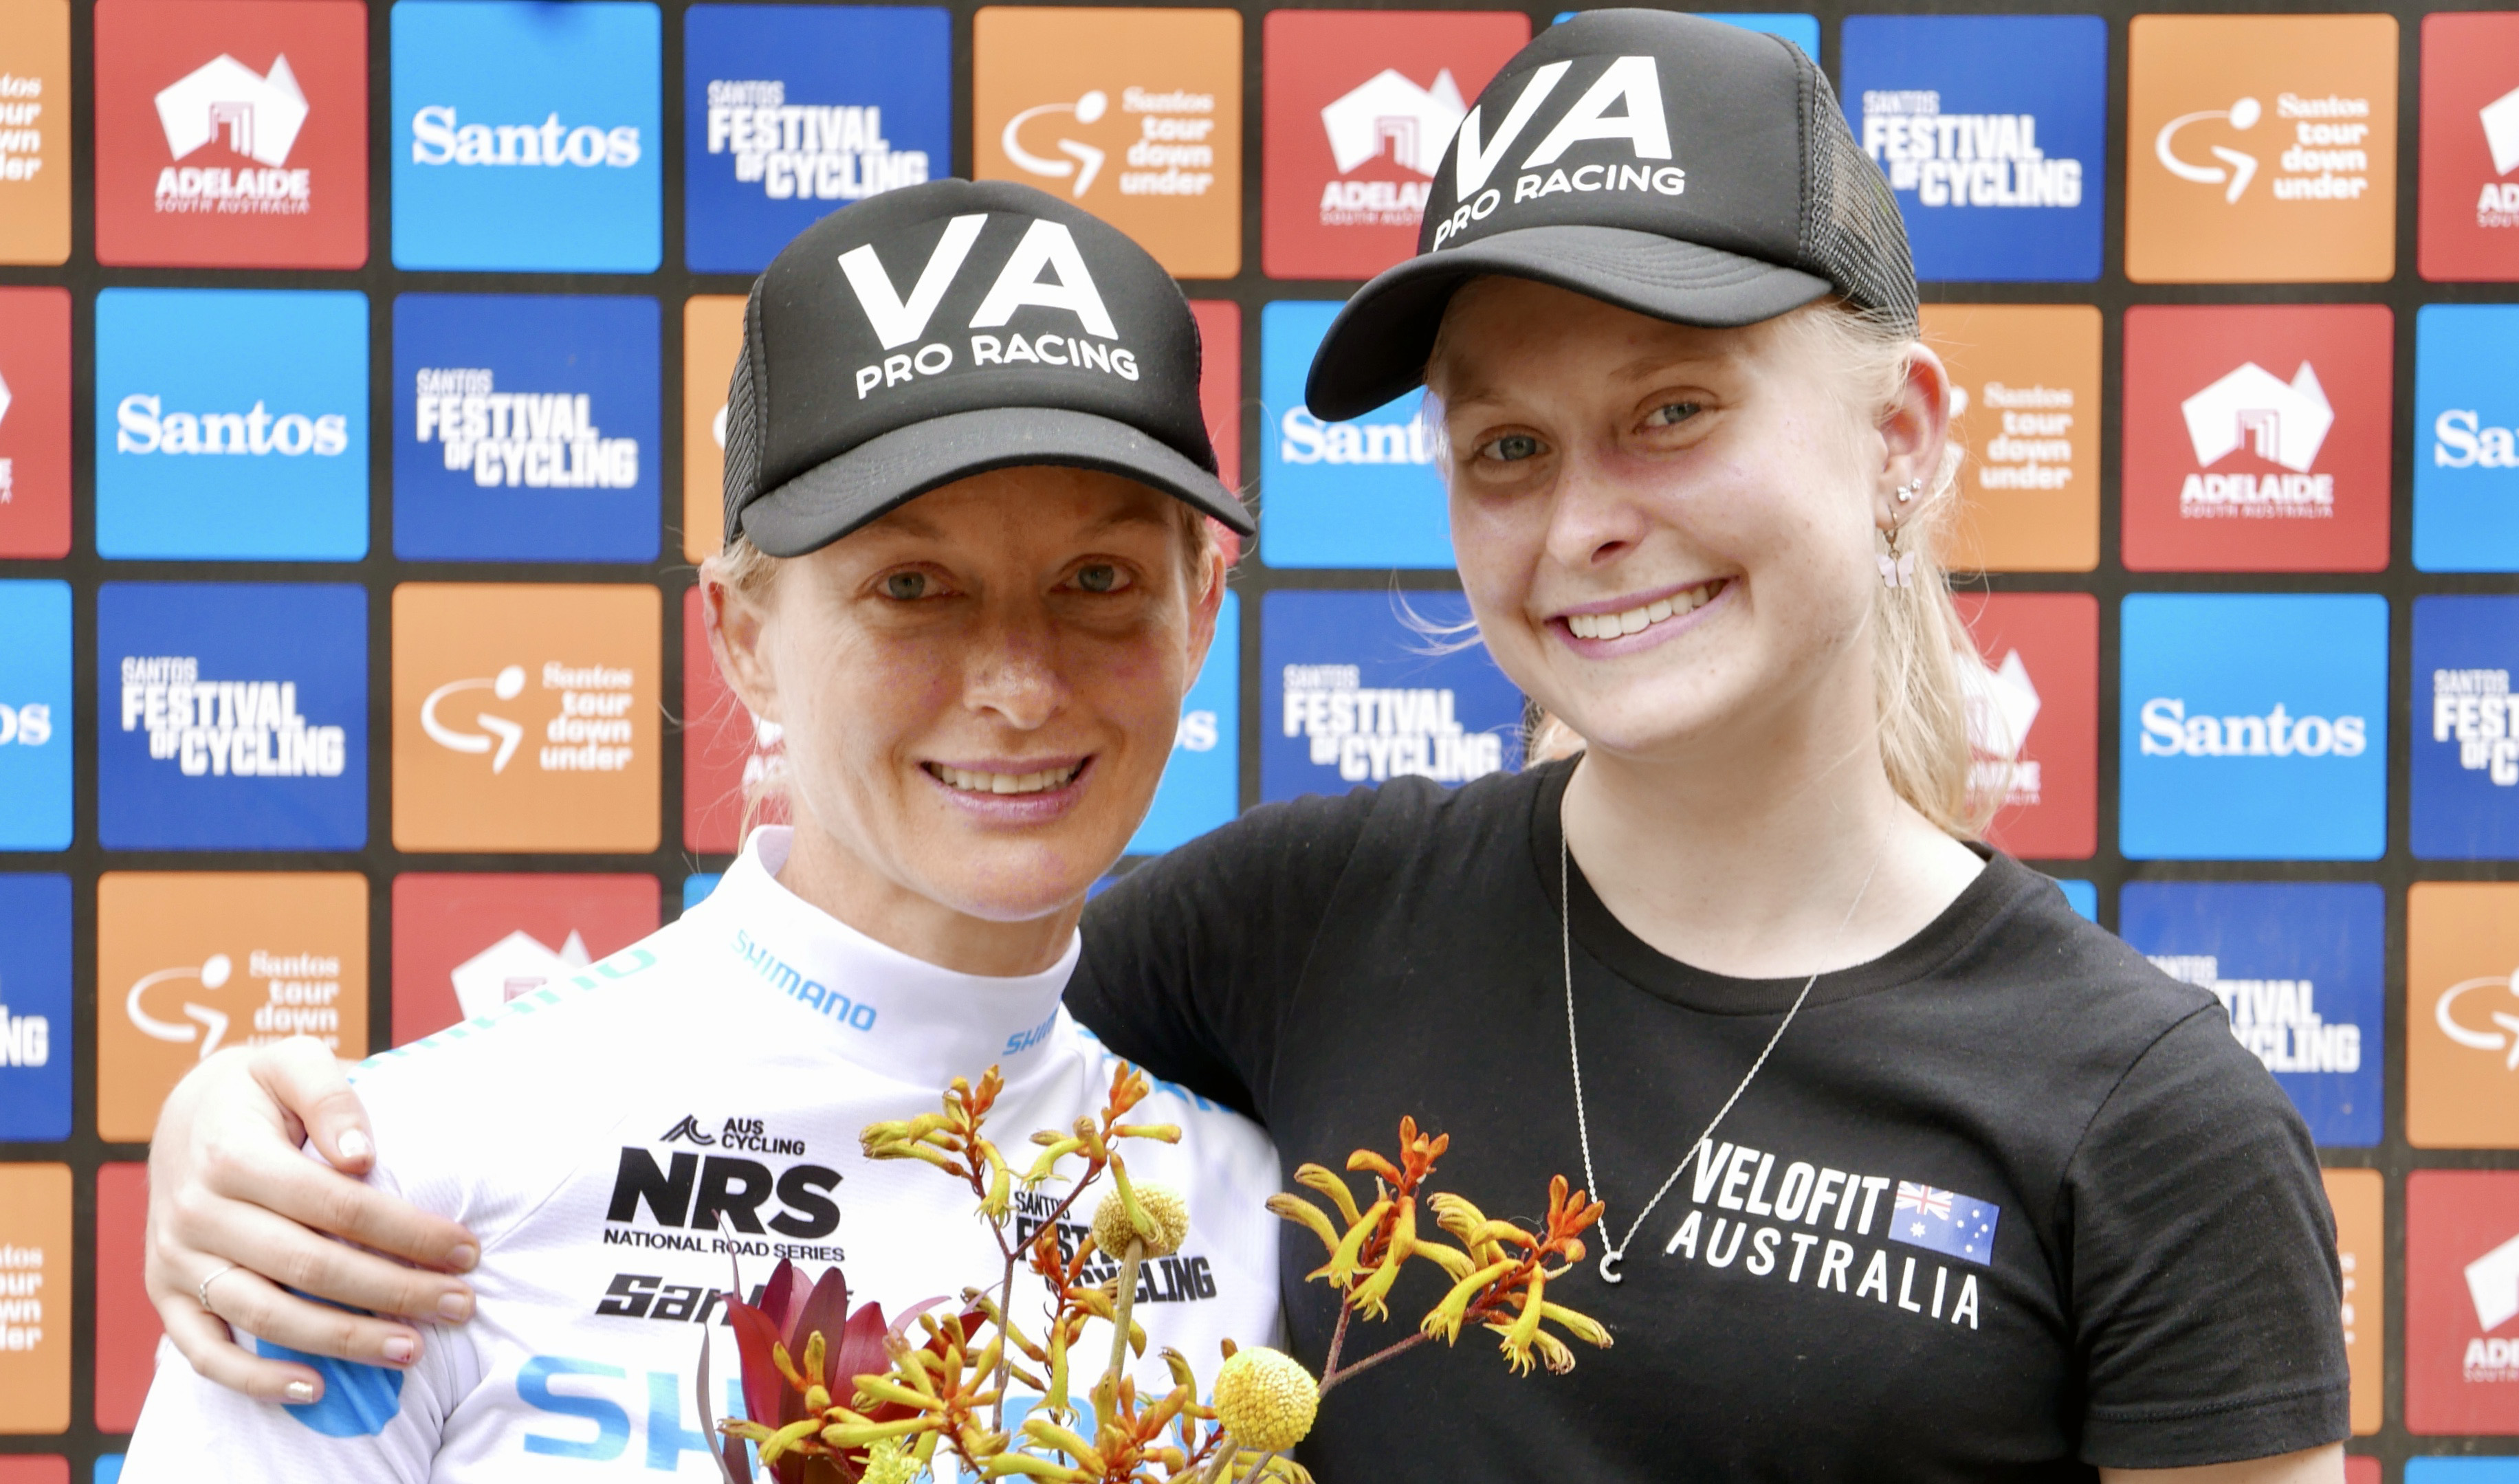 The mother and daughter duo of the Santos Festival of Cycling Cyclingnews